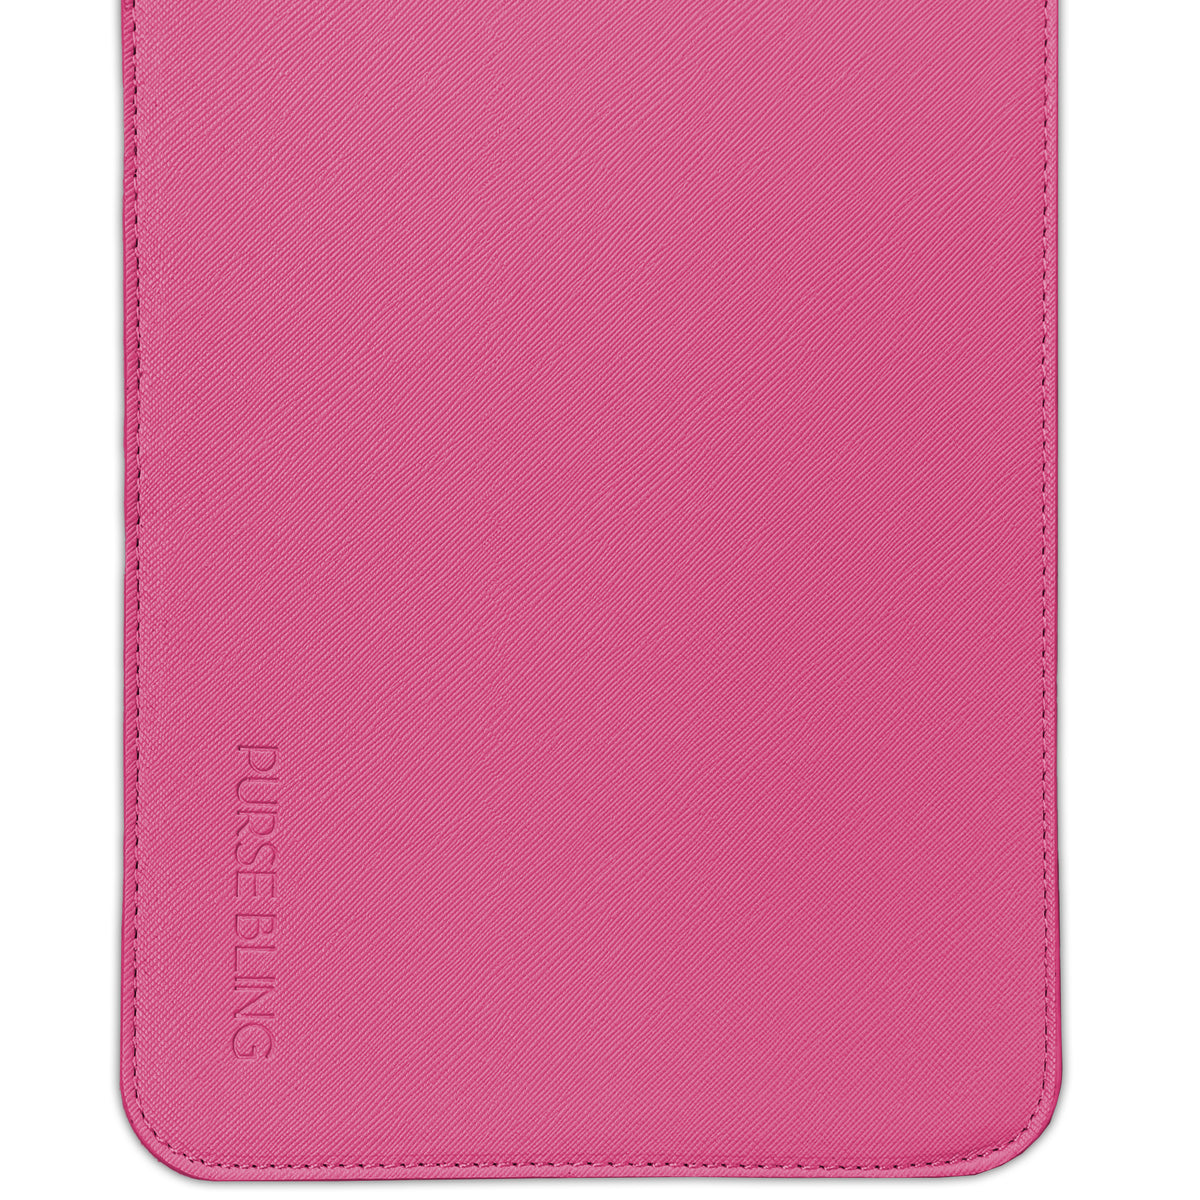 A vegan leather sleeve in pink for the iPad has been replaced with a Base Shaper for LV Neverfull Bags from Purse Bling.